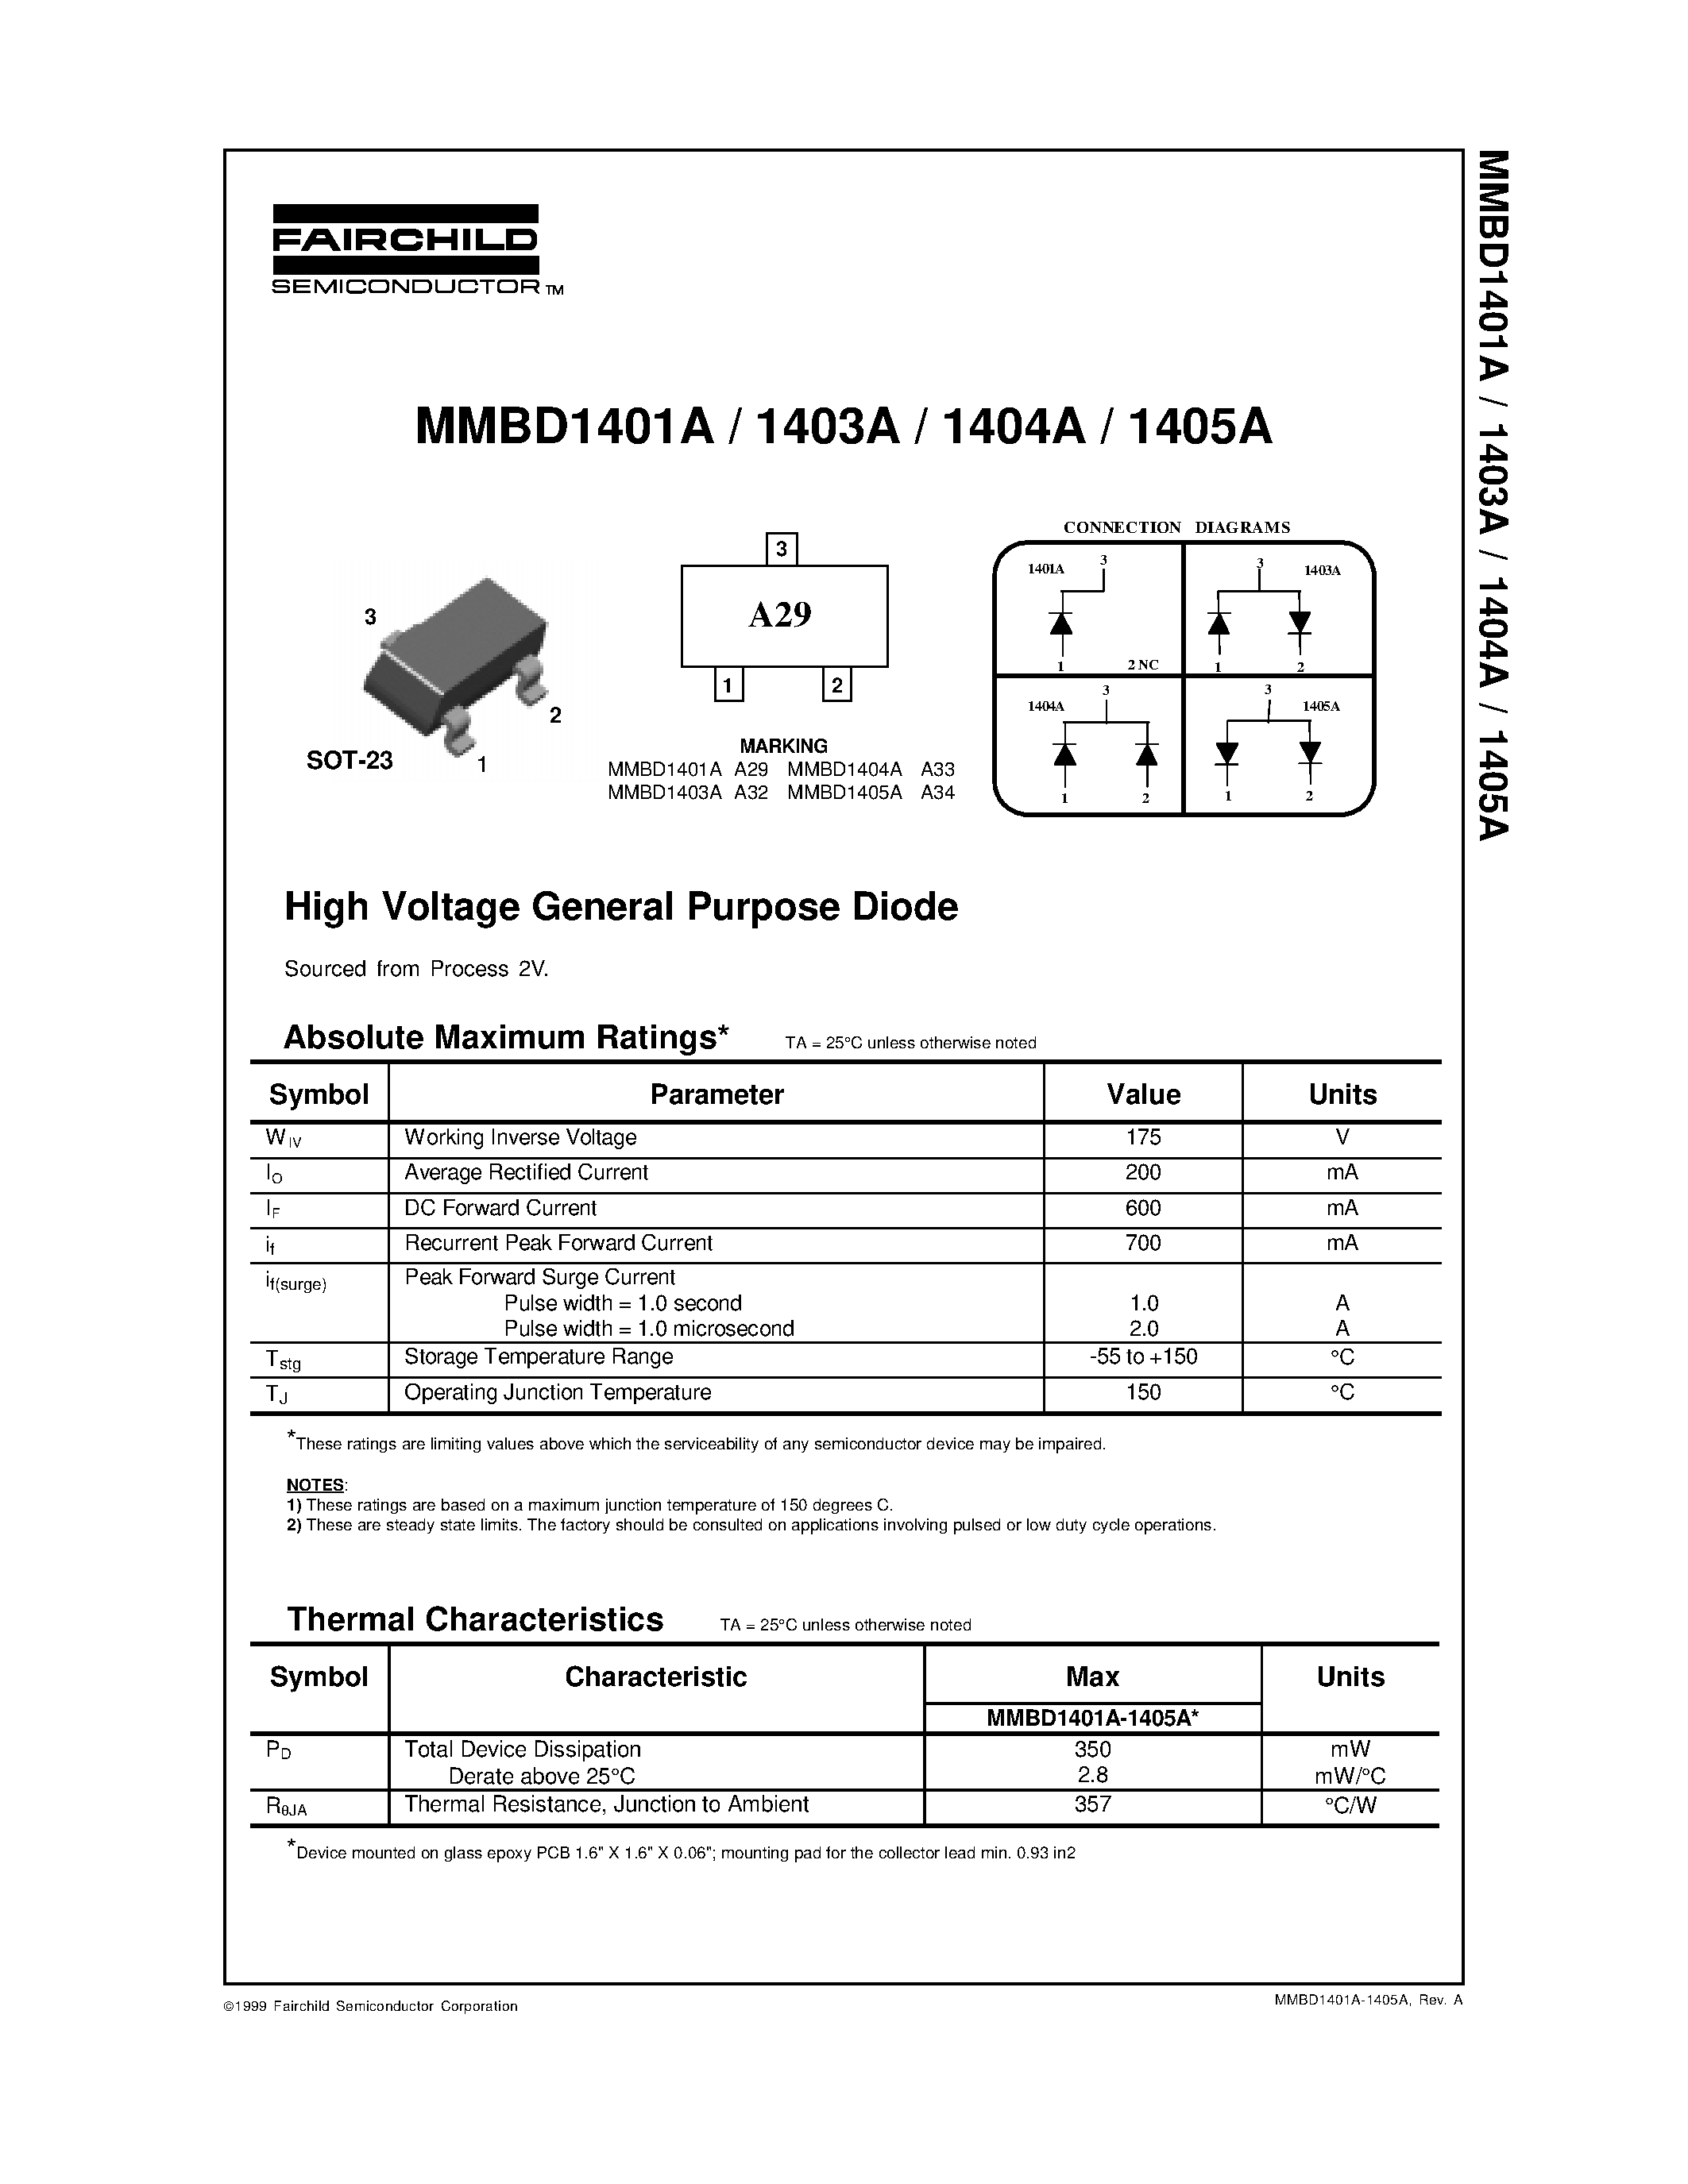 Даташит MMBD1403A - High Voltage General Purpose Diode страница 1